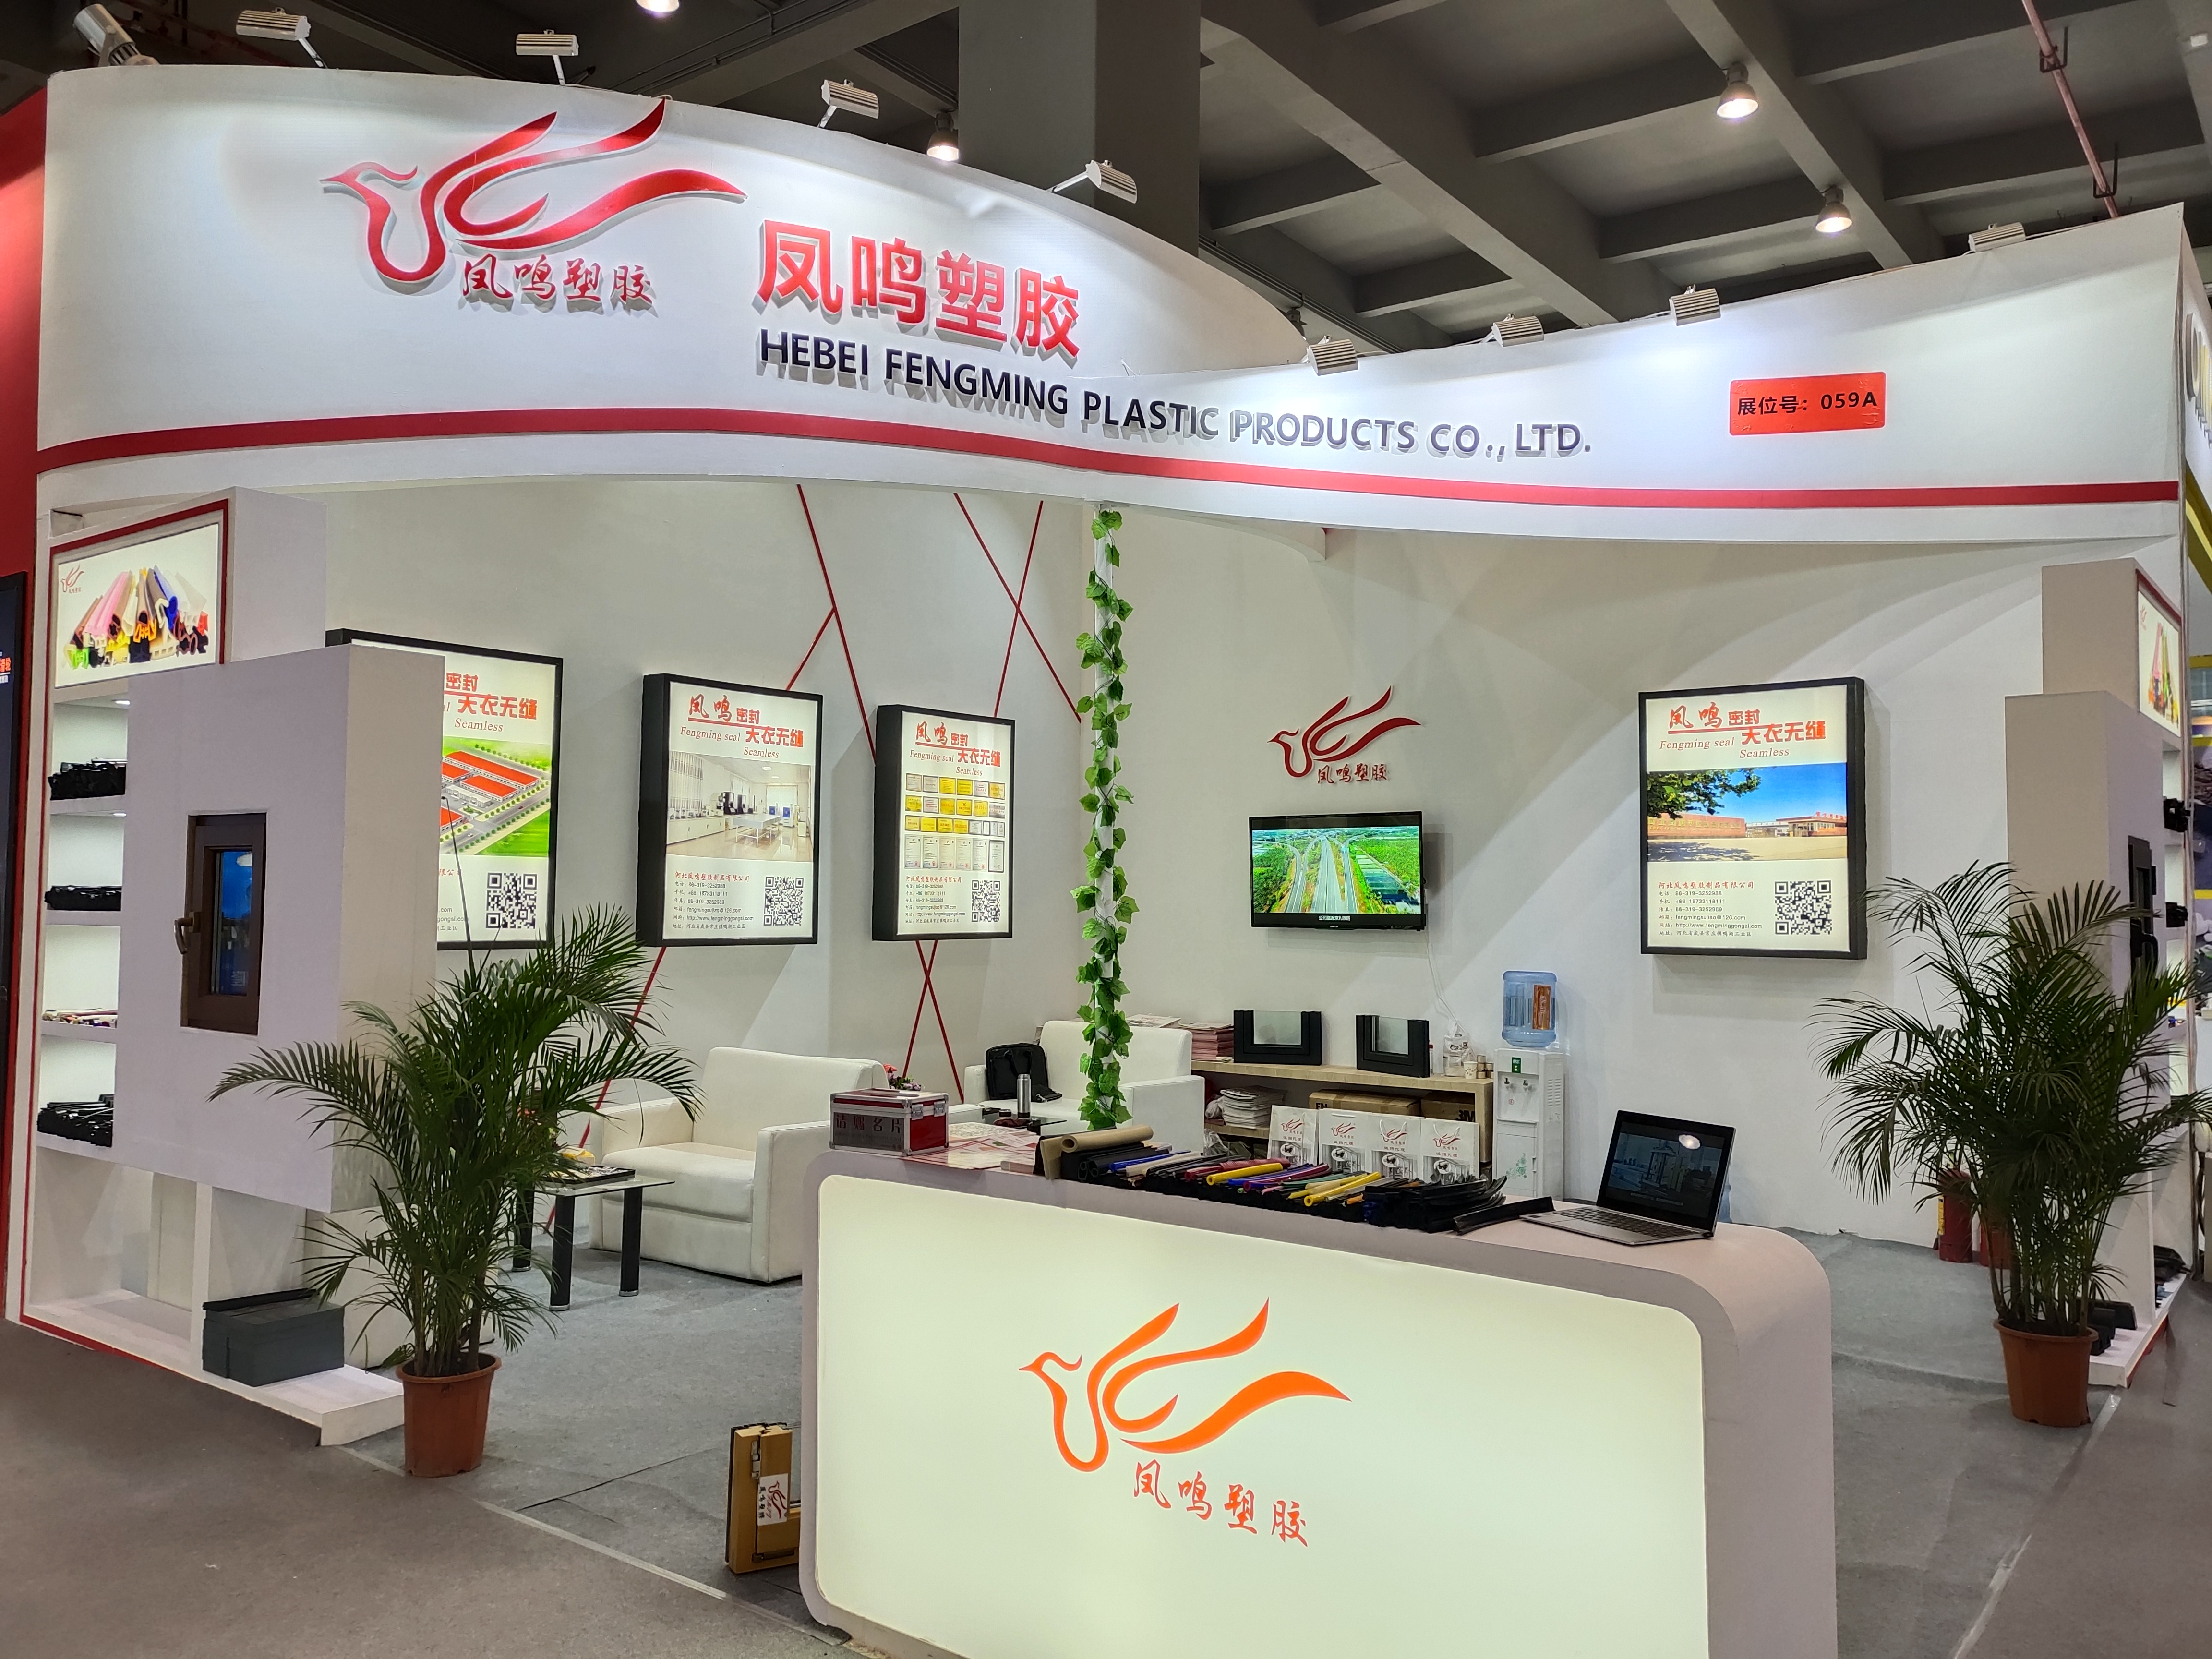 Hebei Fengming Guangzhou Construction Expo ended successfully, thank you for visiting our products.